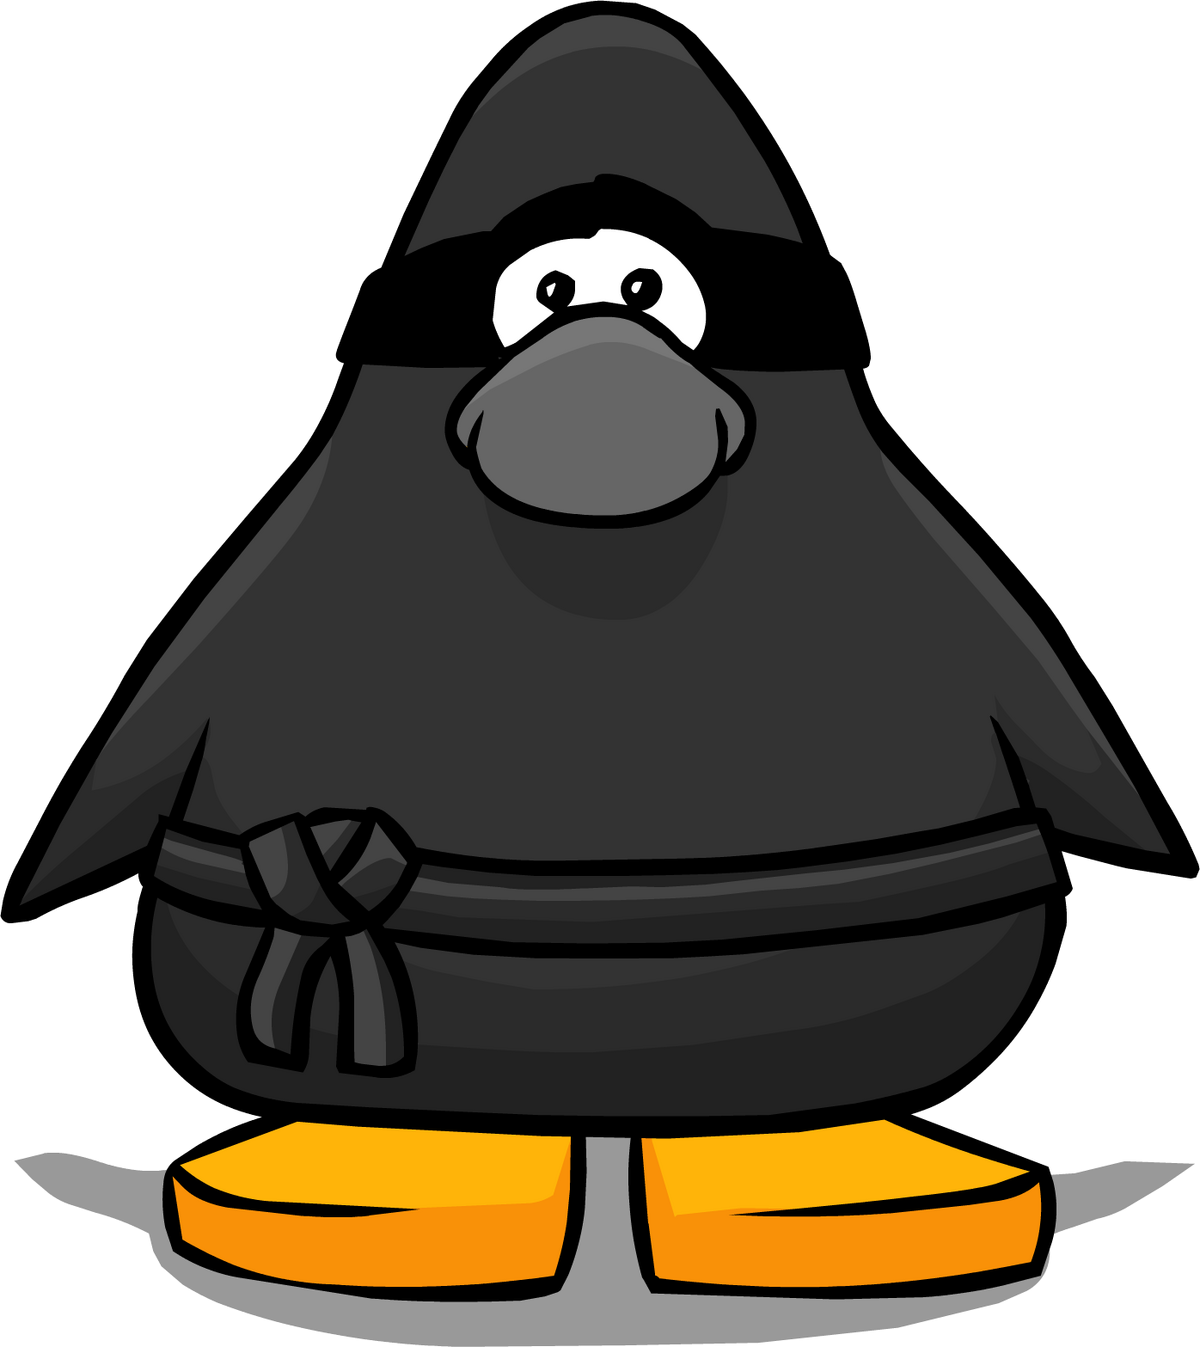 https://static.wikia.nocookie.net/clubpenguin/images/a/ab/Ninja_bg.png/revision/latest/scale-to-width-down/1200?cb=20140806105244